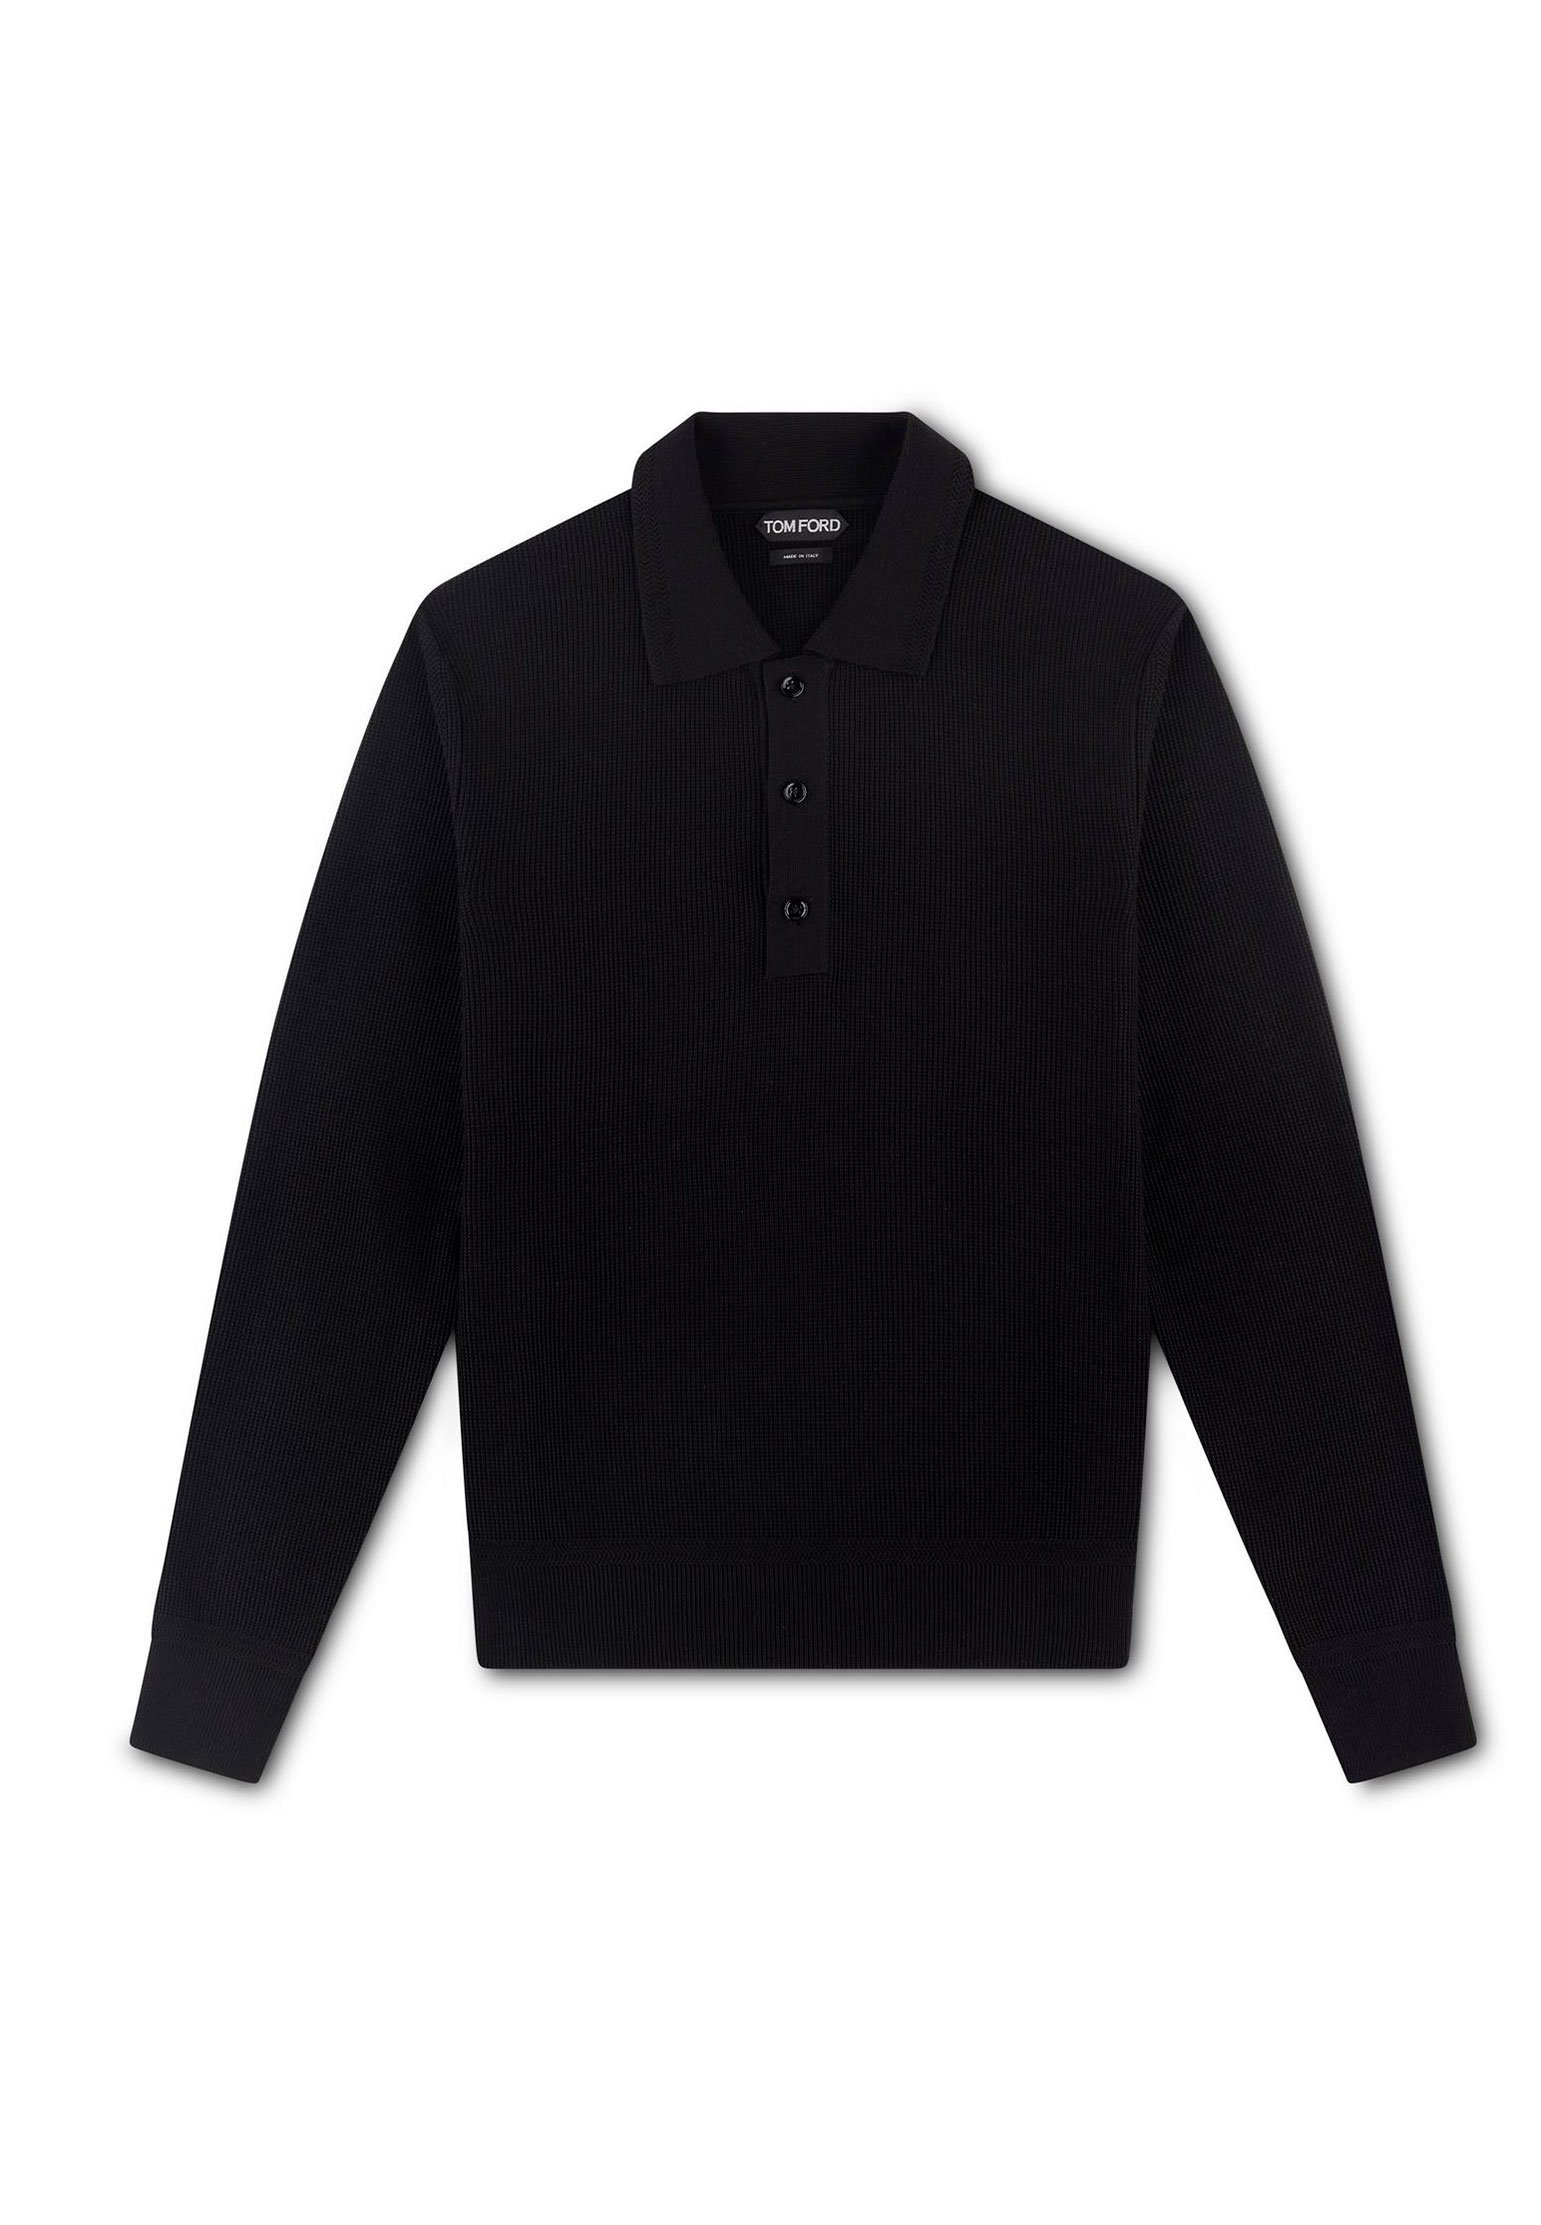 Knitwear polo TOM FORD color: black buy online store of branded clothing  Allure